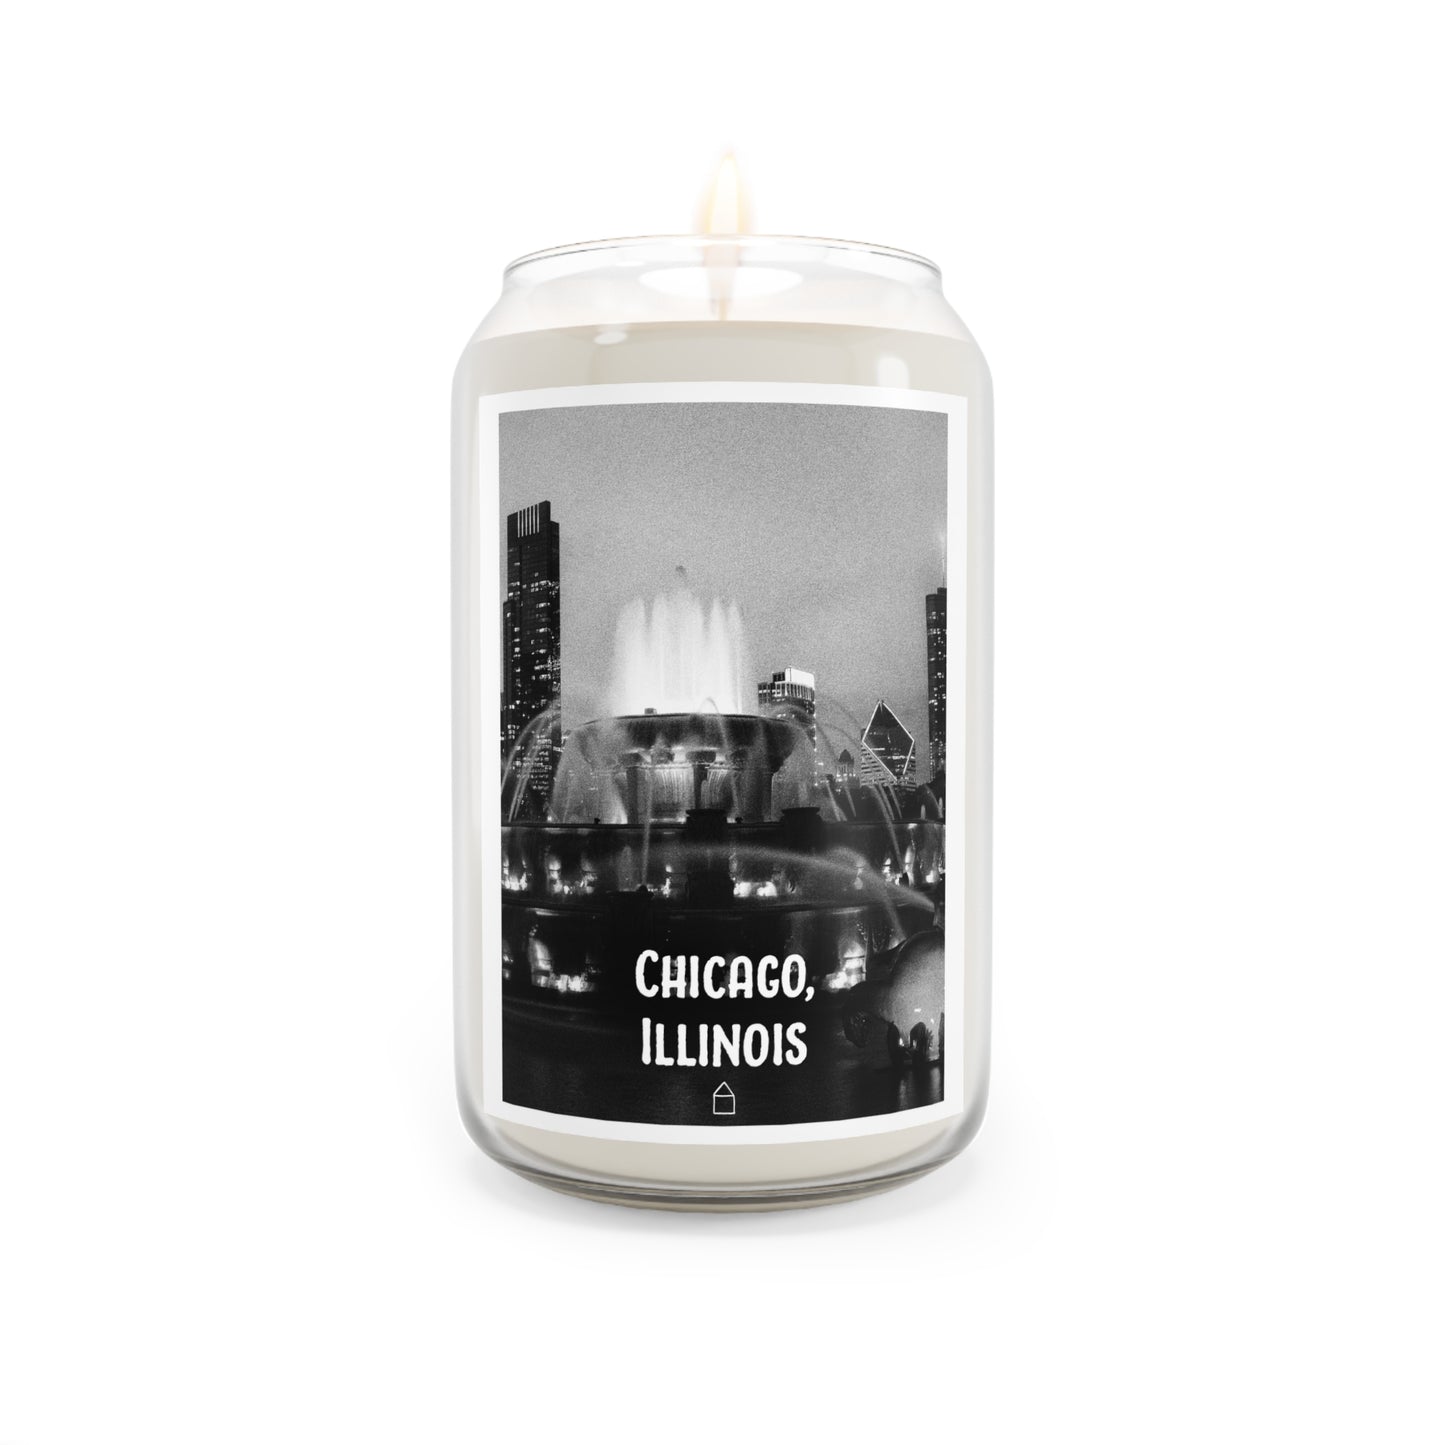 Chicago, Illinois (#011) - Home Town Candles, 13.75oz